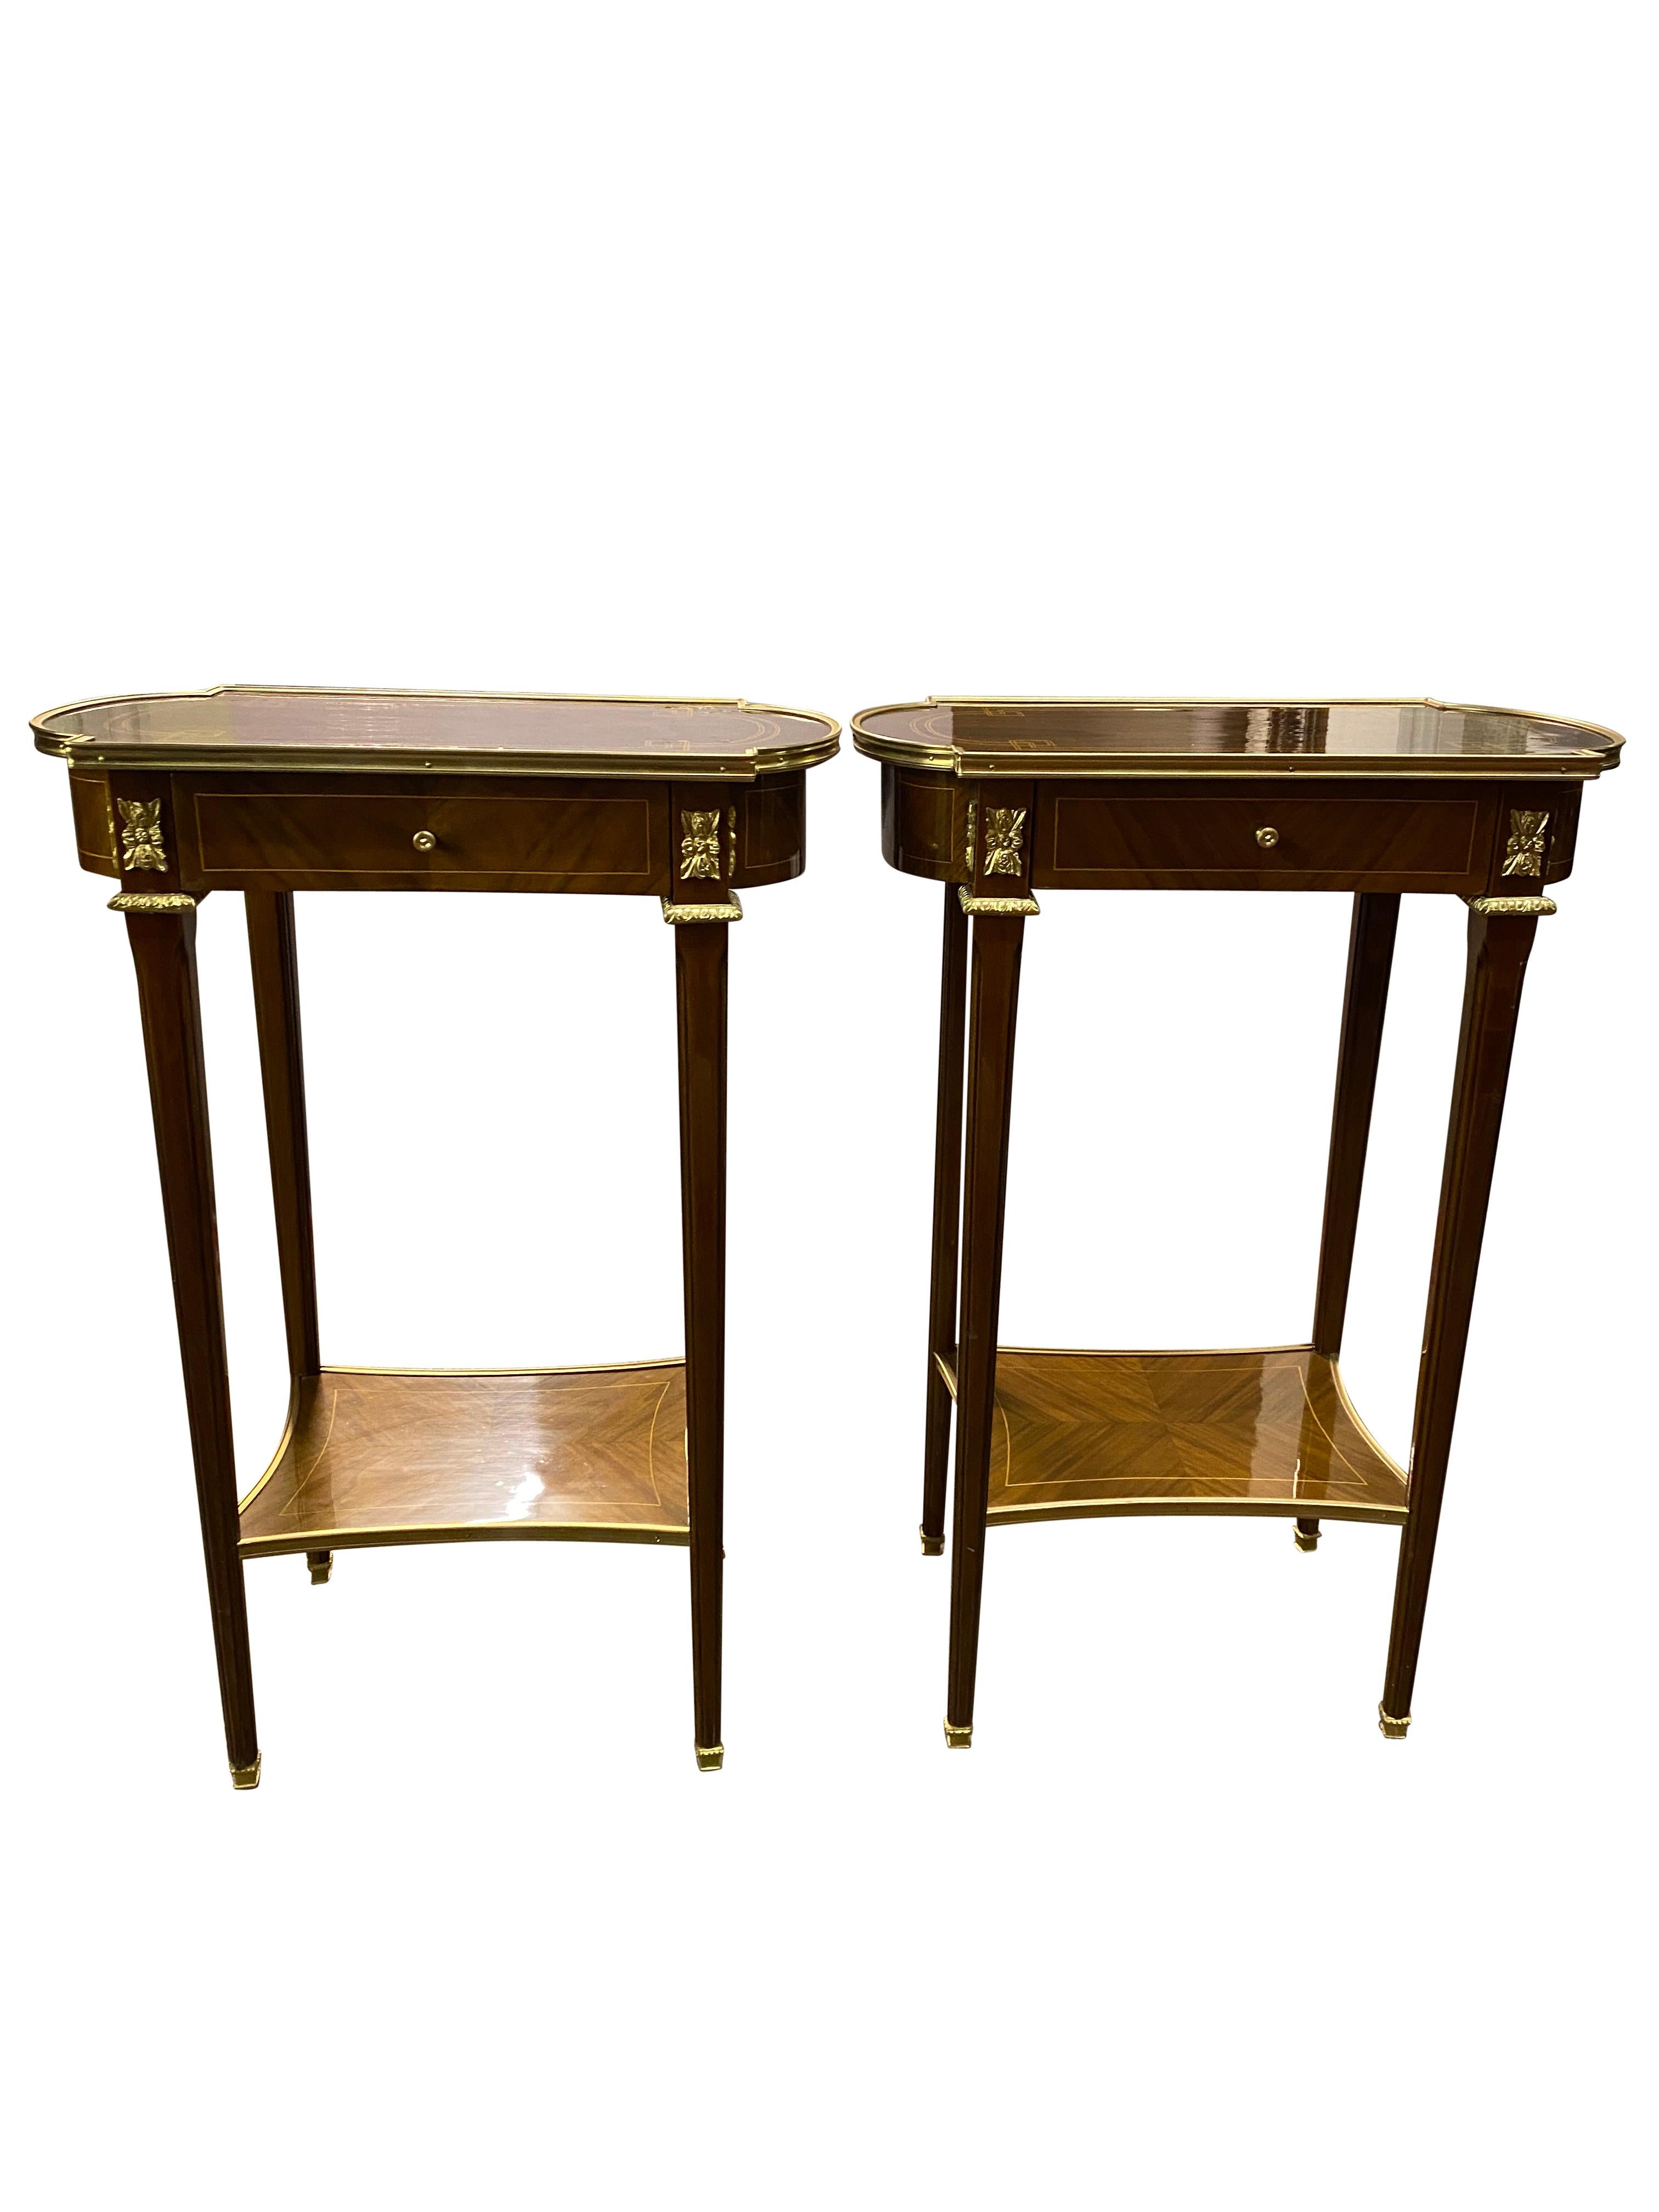 A stunning pair of 20th century English Regency style side tables. A gorgeous and elegant design perfect for modern interiors.

Measurements (cm)
Height 71
Width 50
Depth 31.